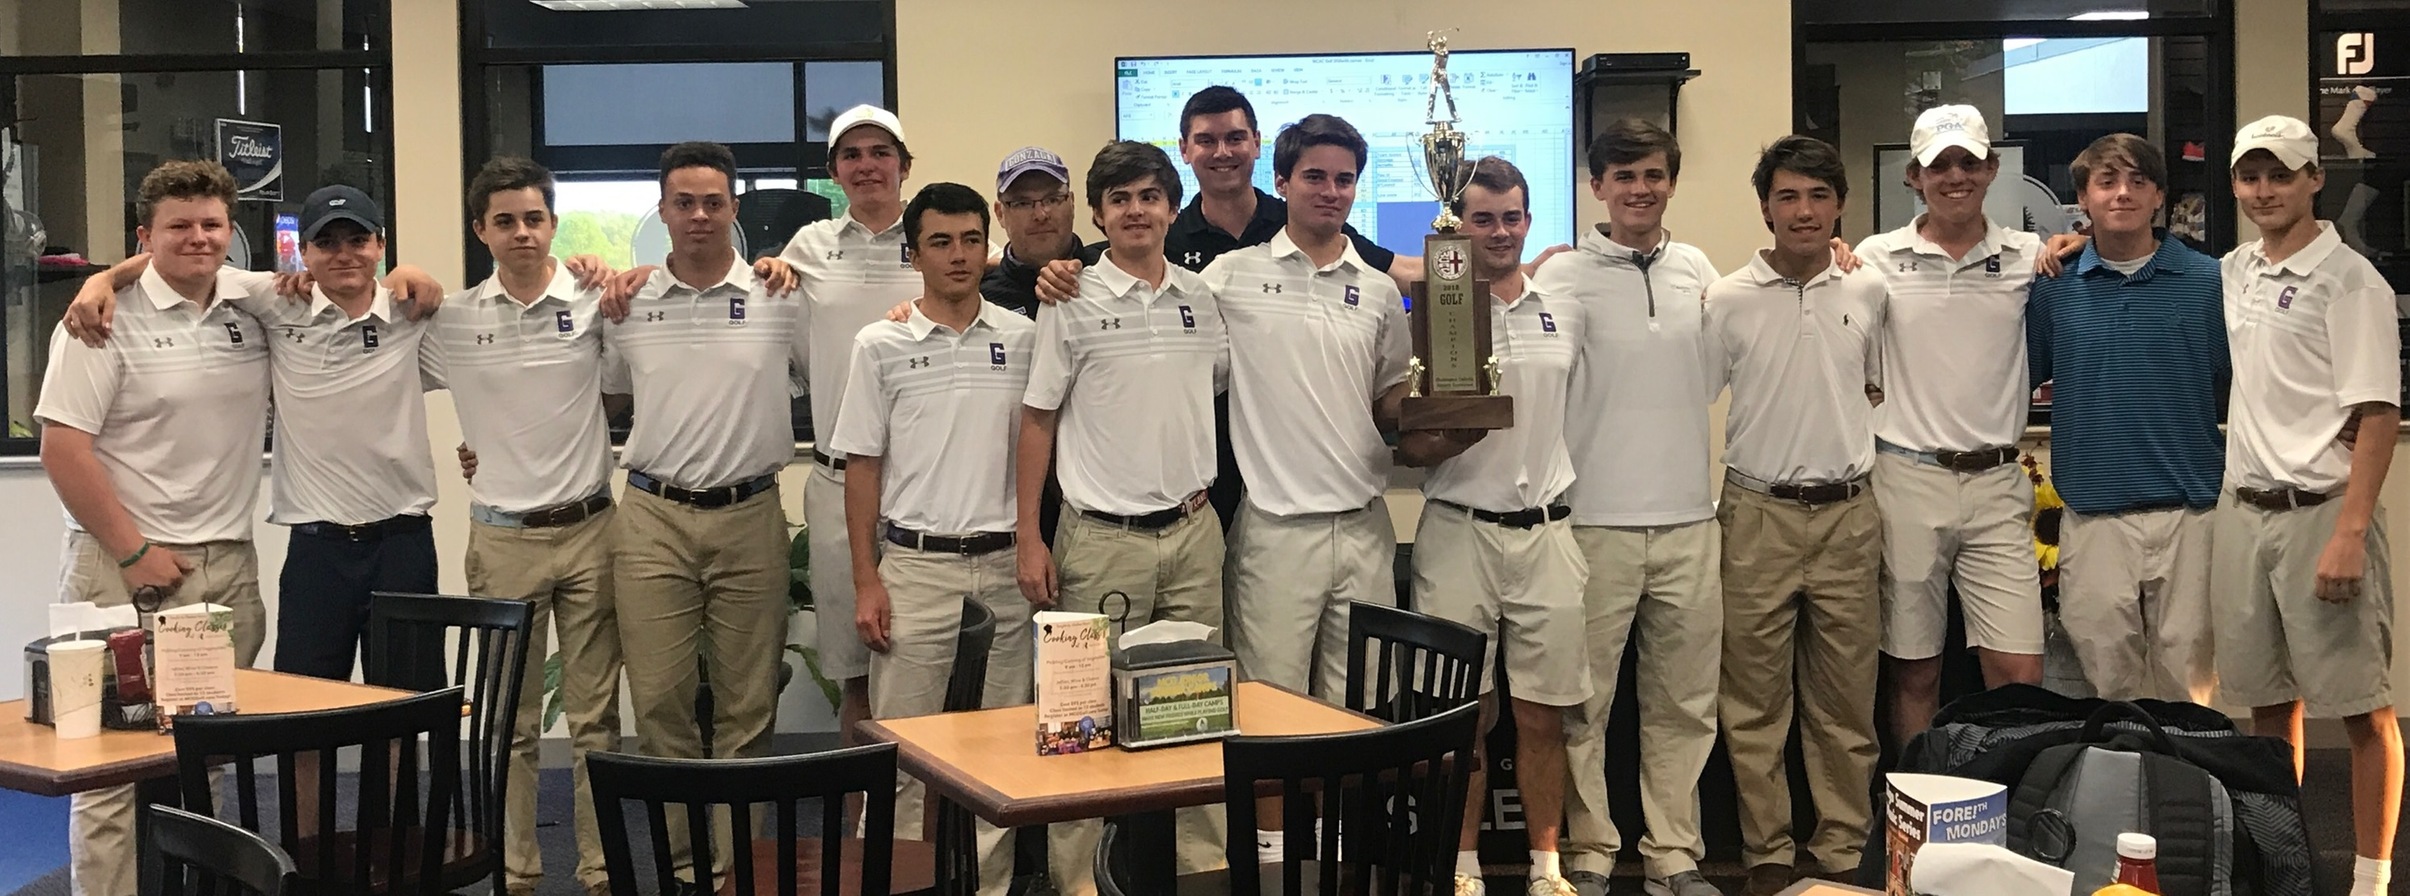 Gonzaga wins WCAC golf title; Jimmy Taylor beats teammates in playoff for individual crown